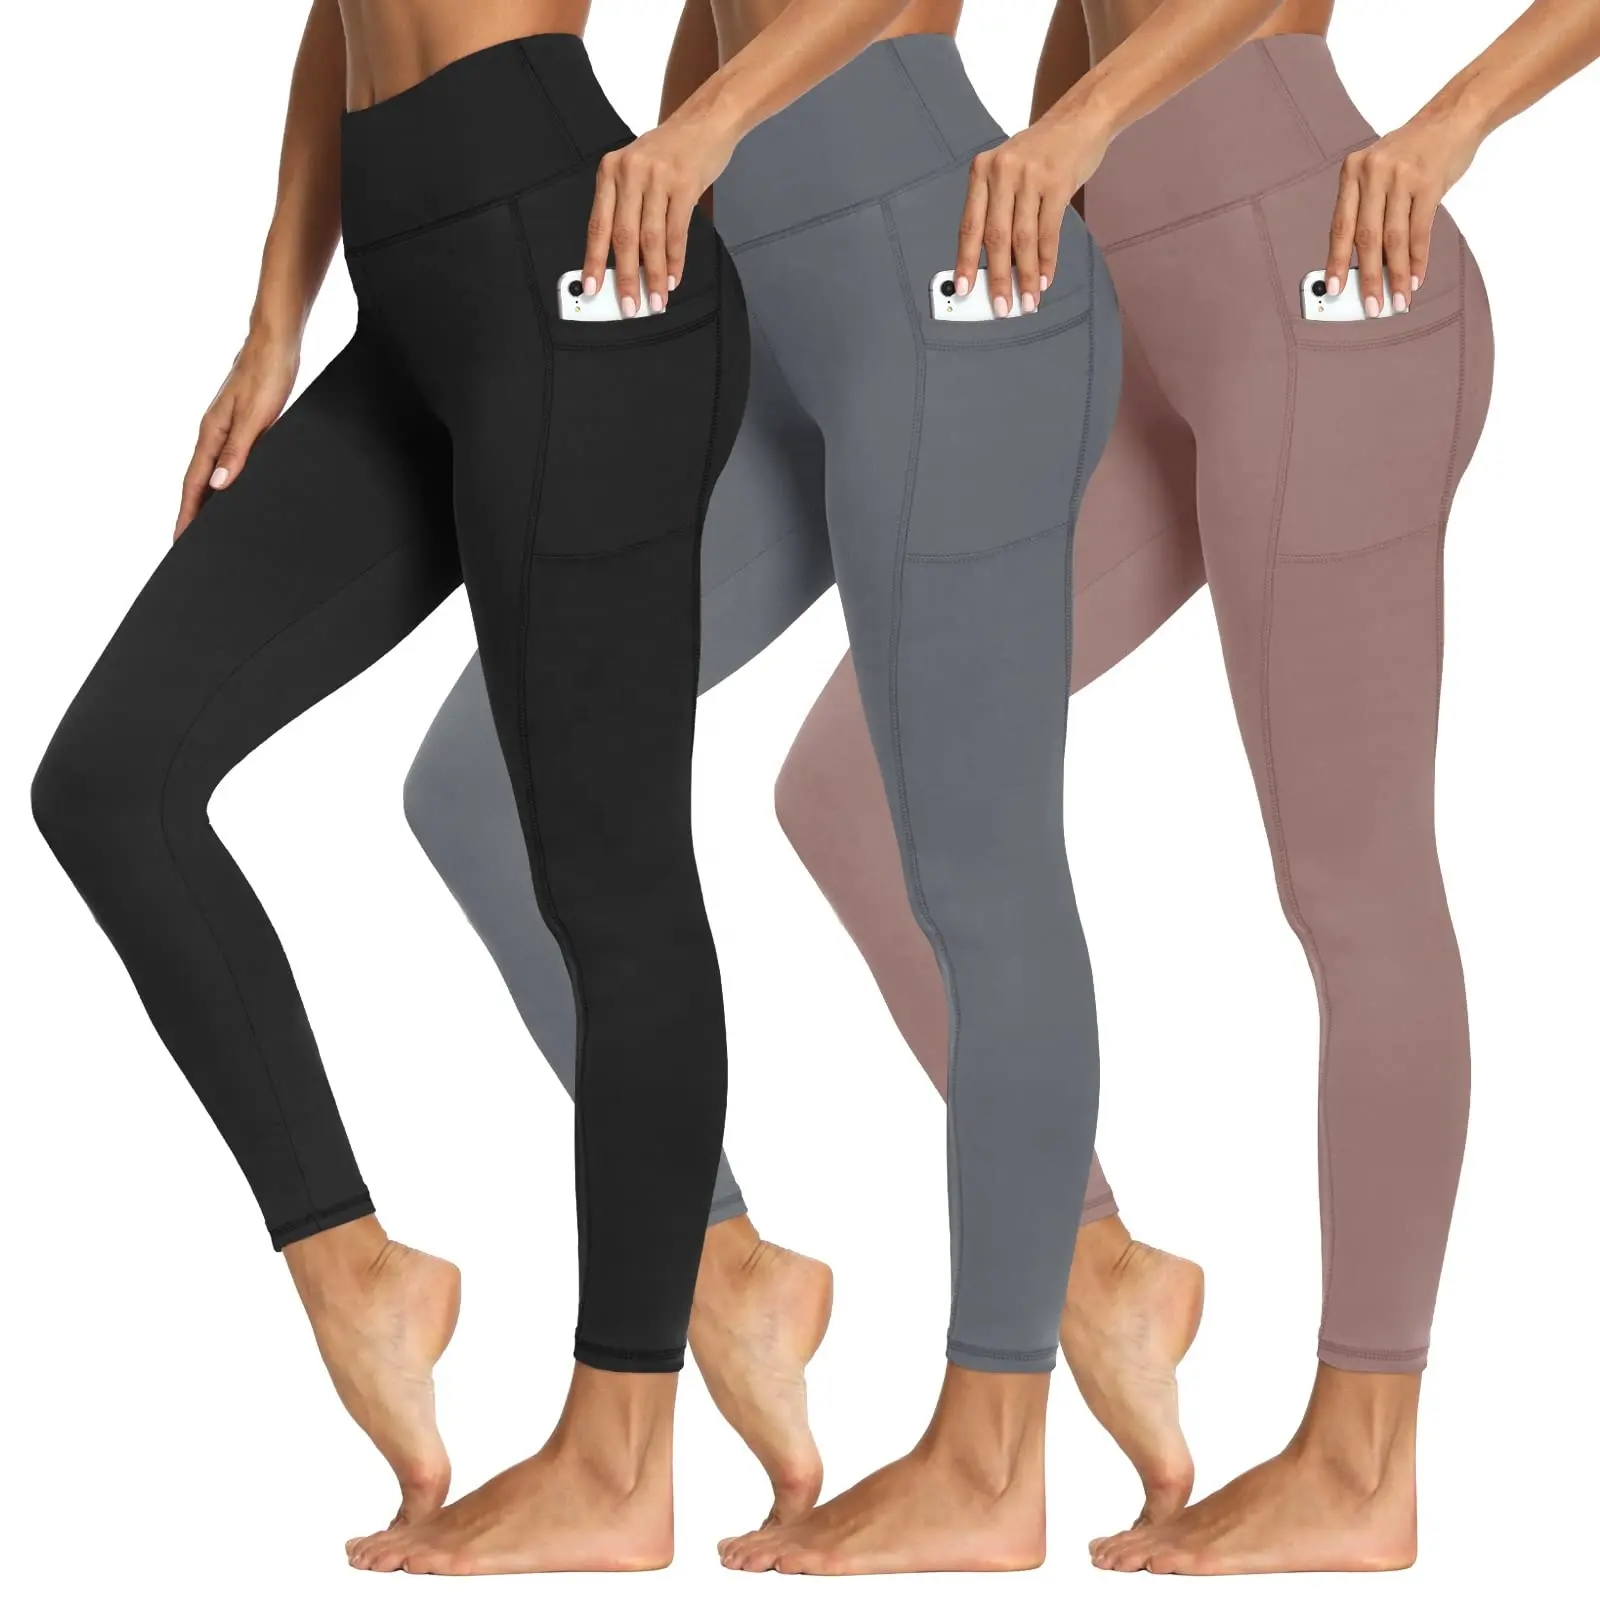 Wholesale Custom High Waisted Sports Workout Yoga Pants Leggings For Women Soft Polyester Gym Fitness Leggings With Pocket